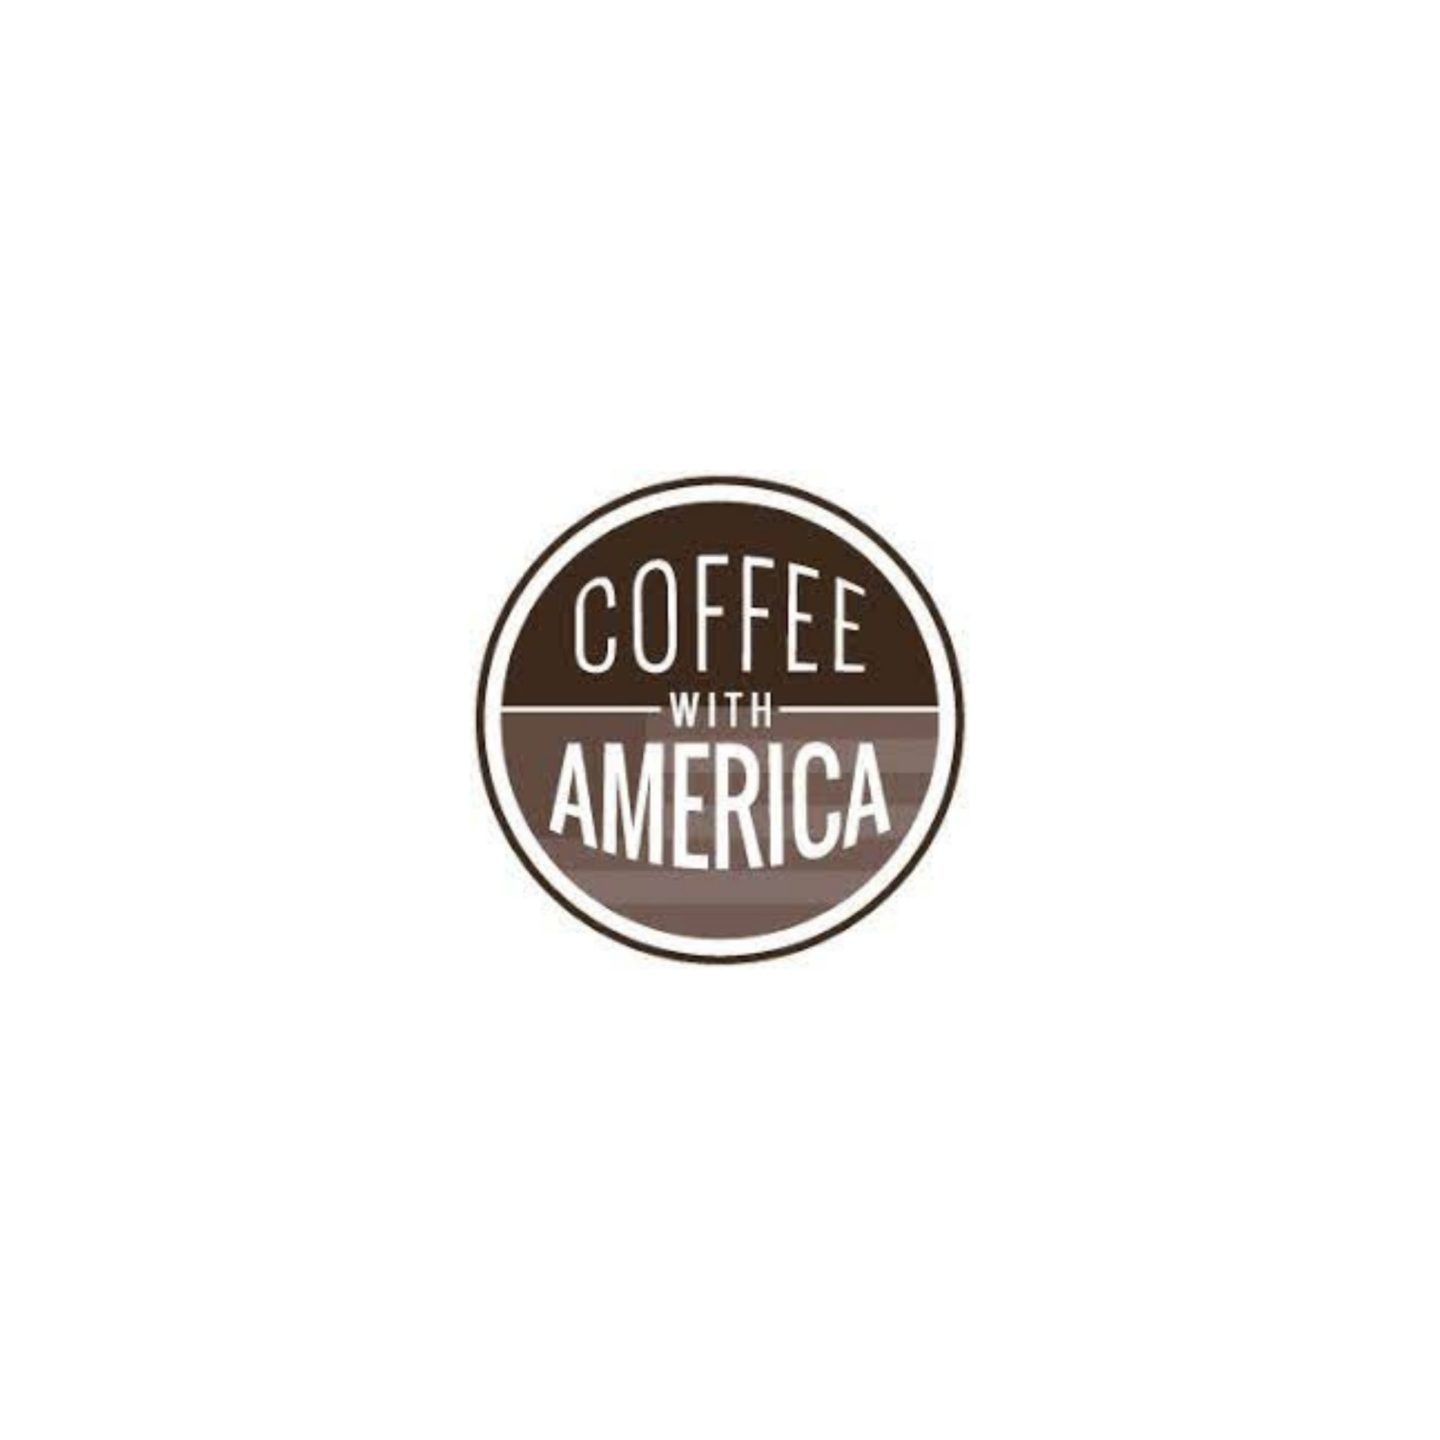 Atlanta TV Host Kelly Page for BlueGrayGal on Coffee with America